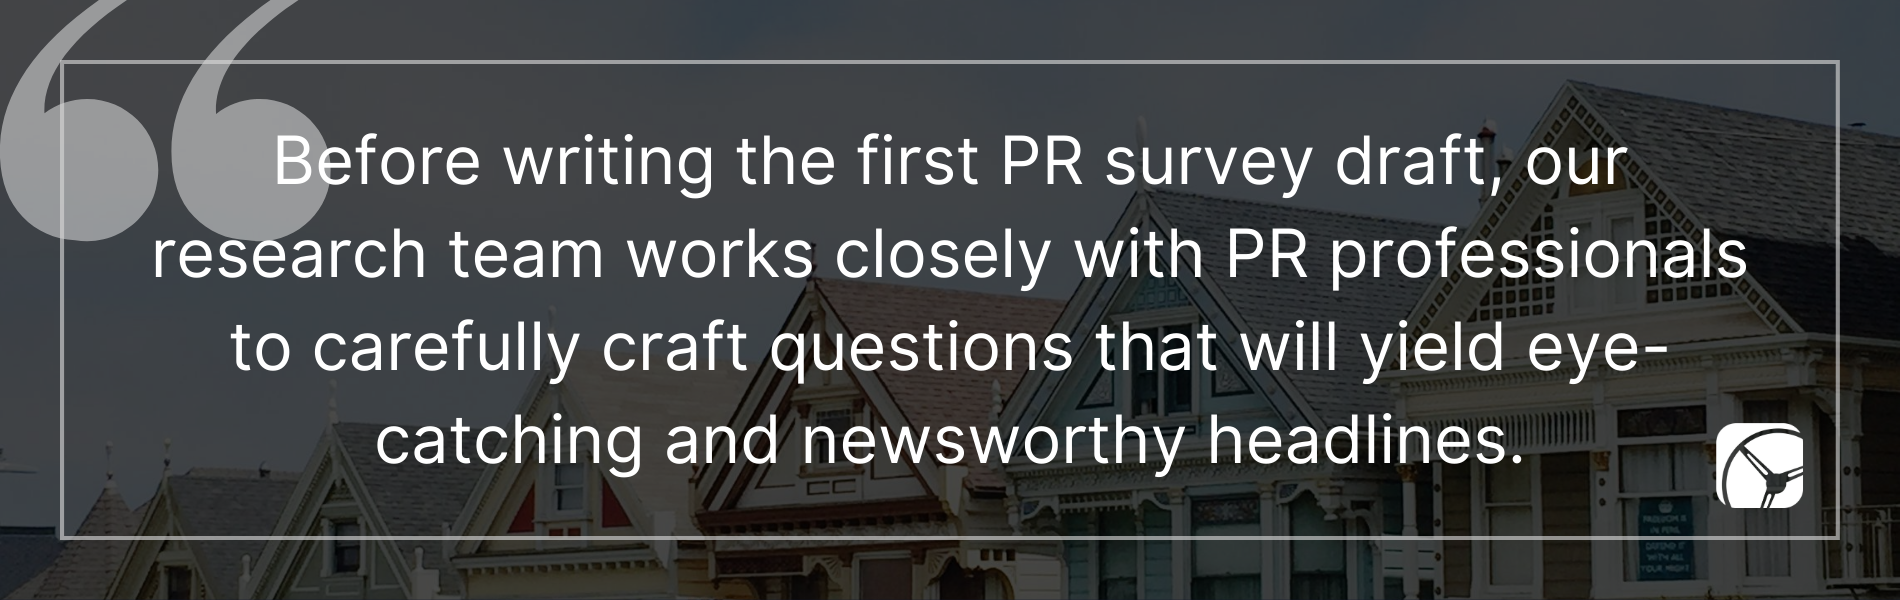 Before writing the first survey draft, our research team works closely with PR professionals to carefully craft questions that will yield eye-catching and newsworthy headlines.